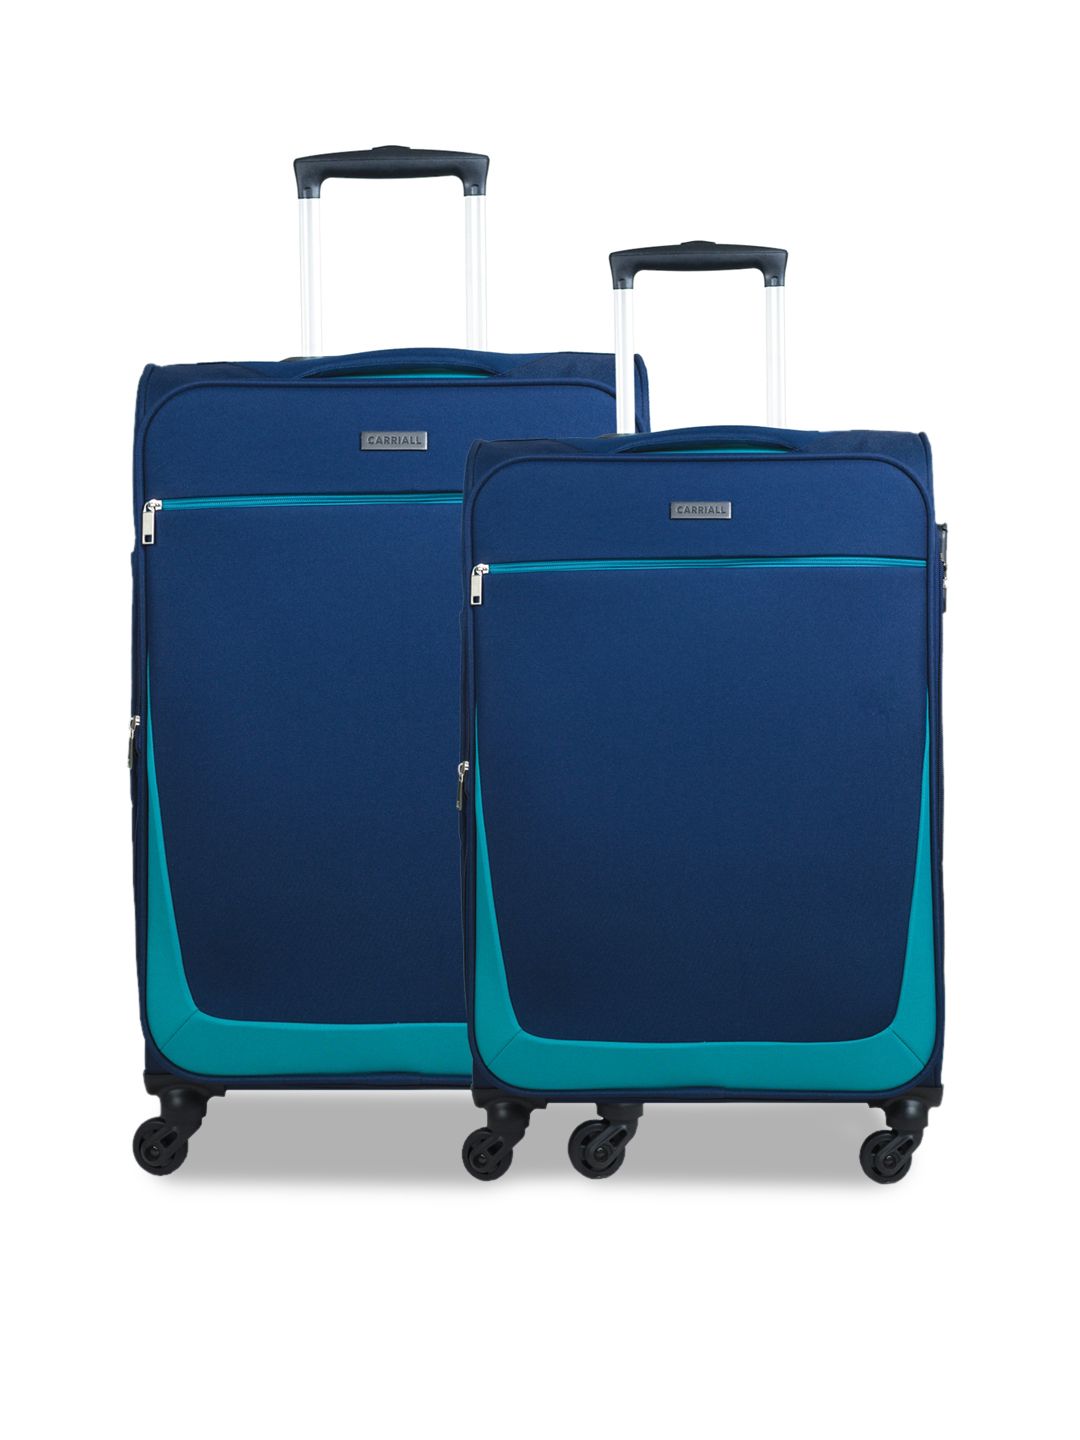 CARRIALL Set Of 2 Navy Blue Solid Trolley Suitcases Price in India